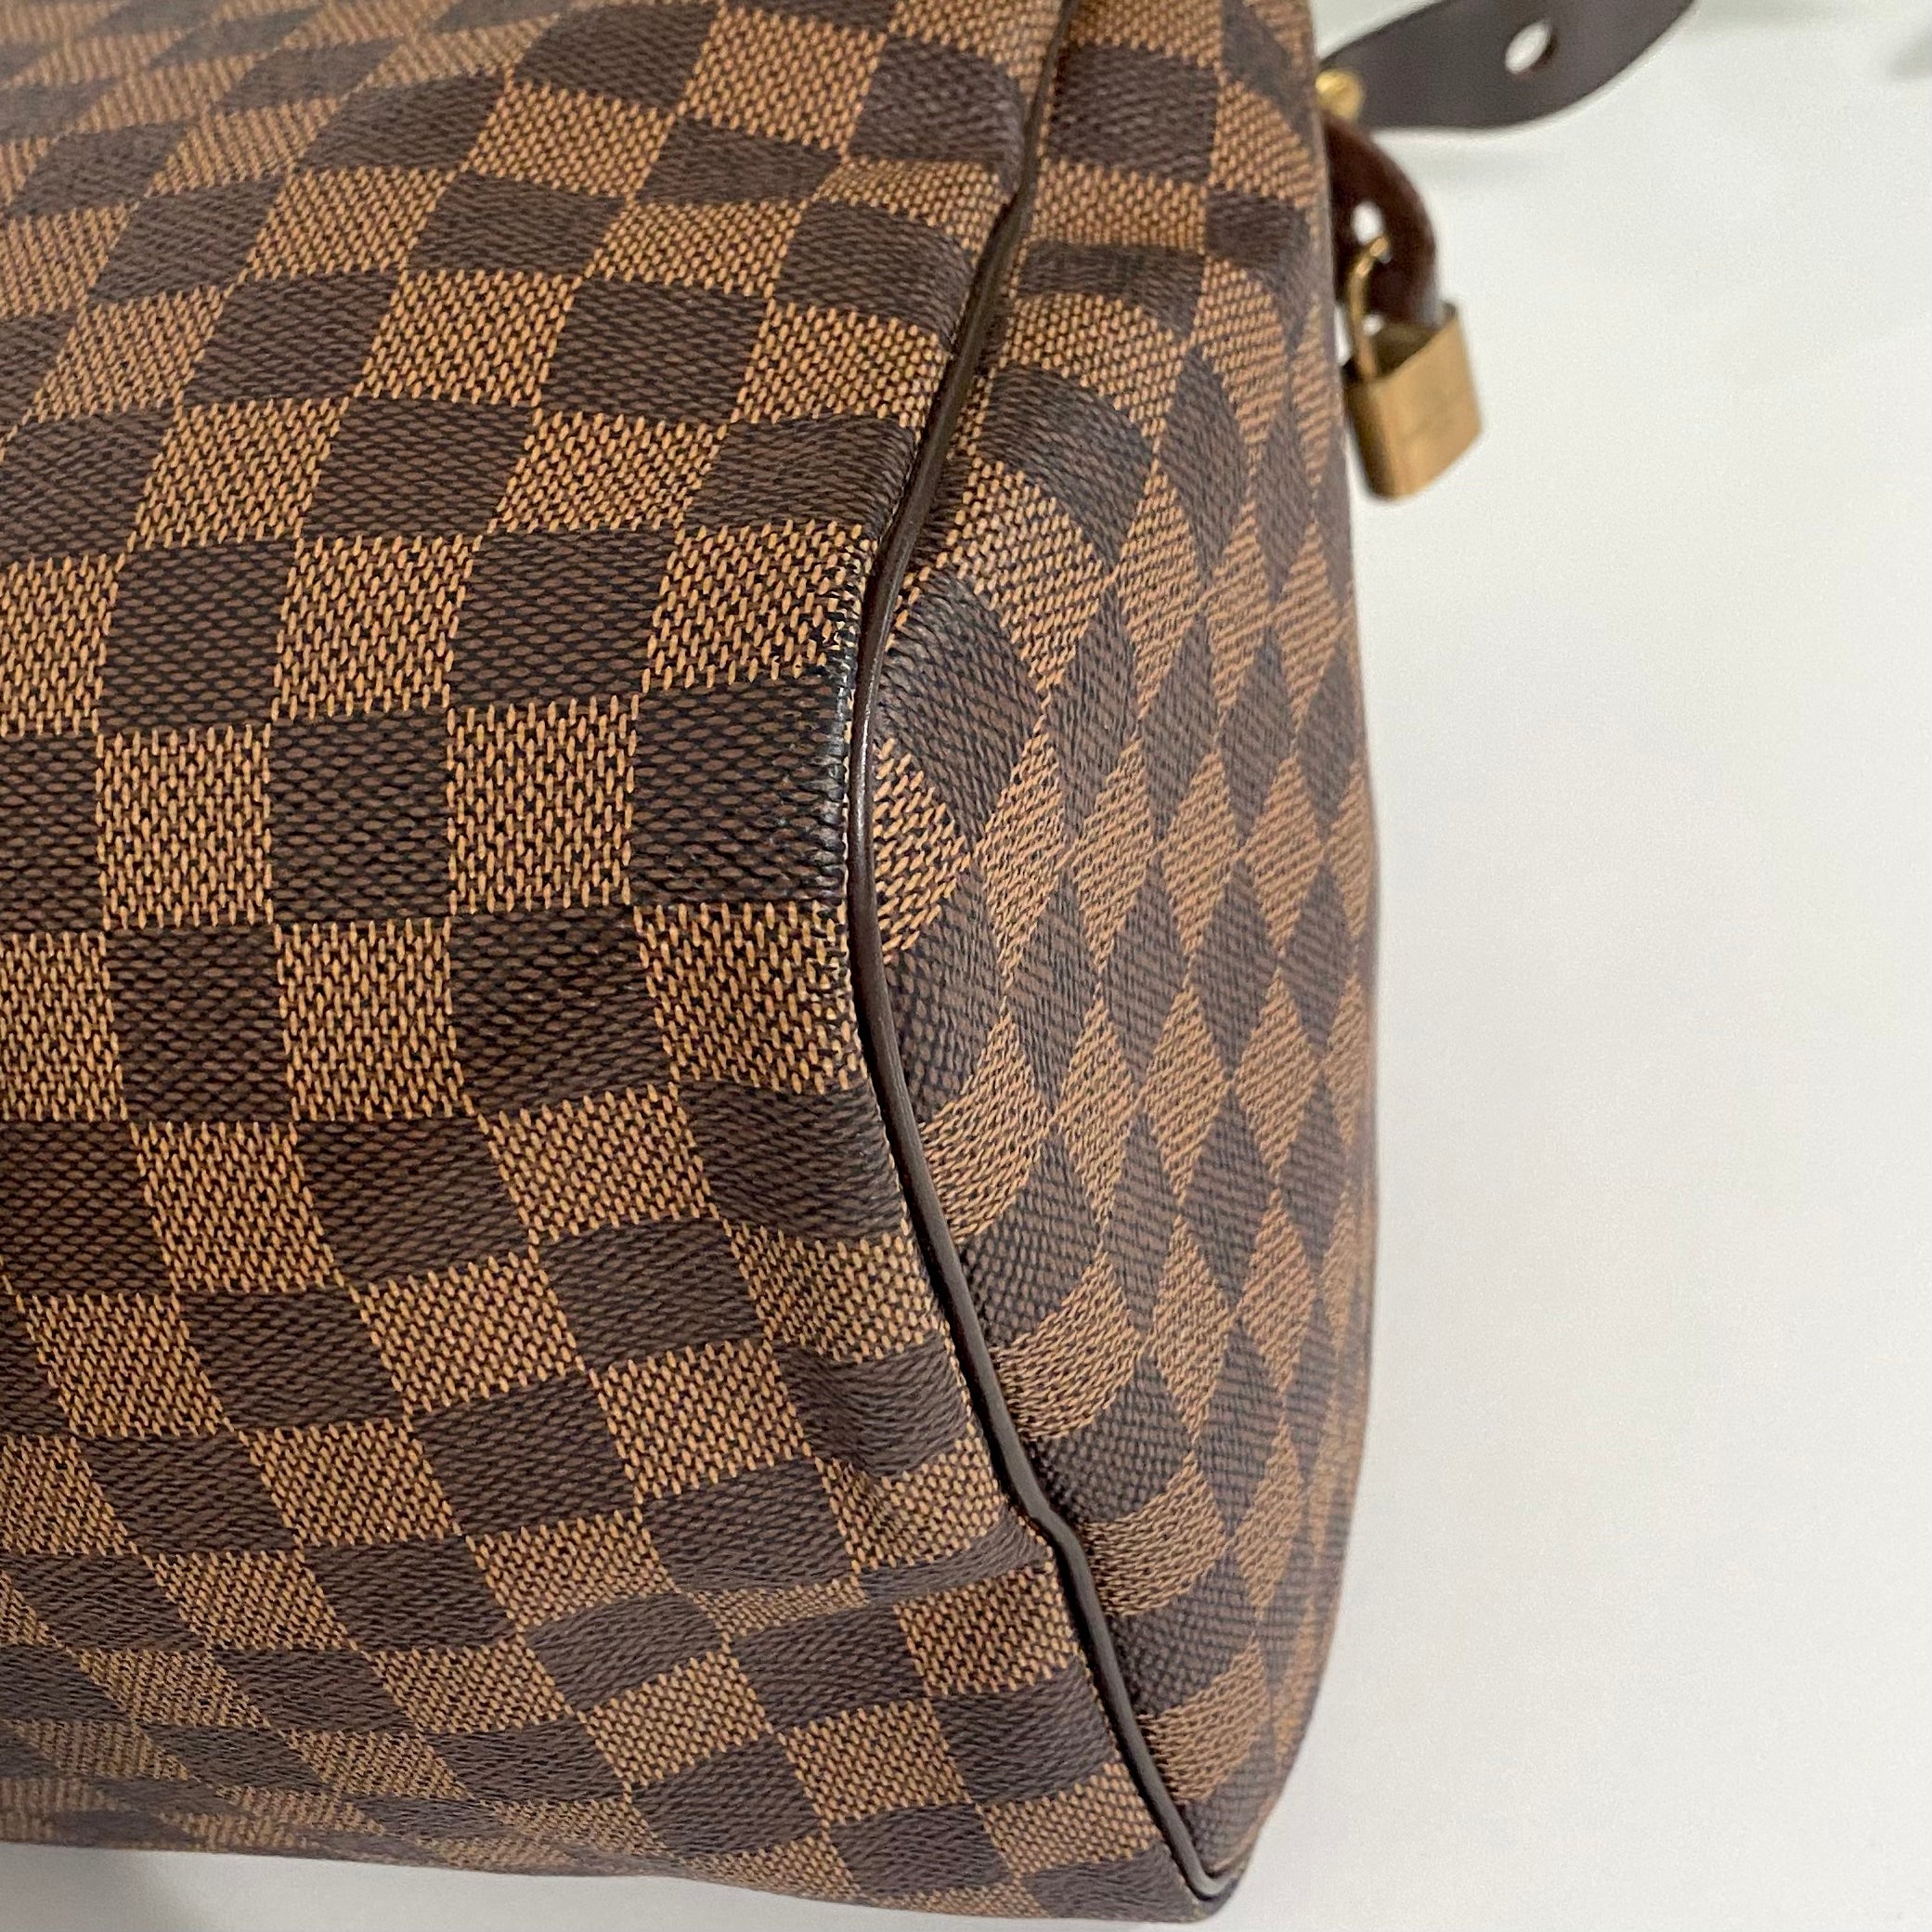 FIRST LOOK 🤩 the highly anticipated Speedy 20 Damier Ebene